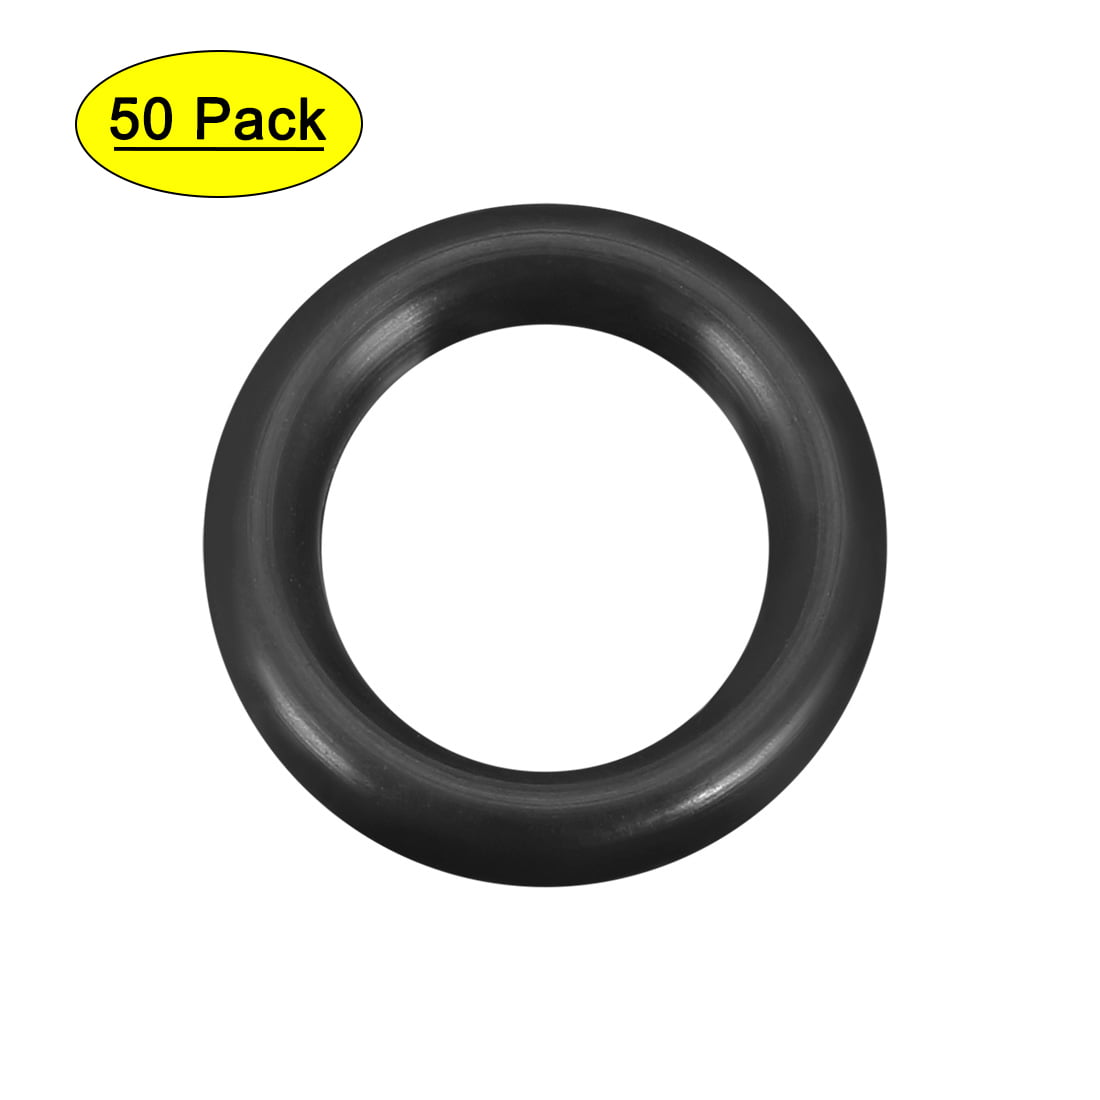 50 Pcs Nitrile Rubber O-Ring Sealing Washer Round Sealing Ring Universal O-Ring Assortment Gasket 20mm OD 16mm ID 2mm Width